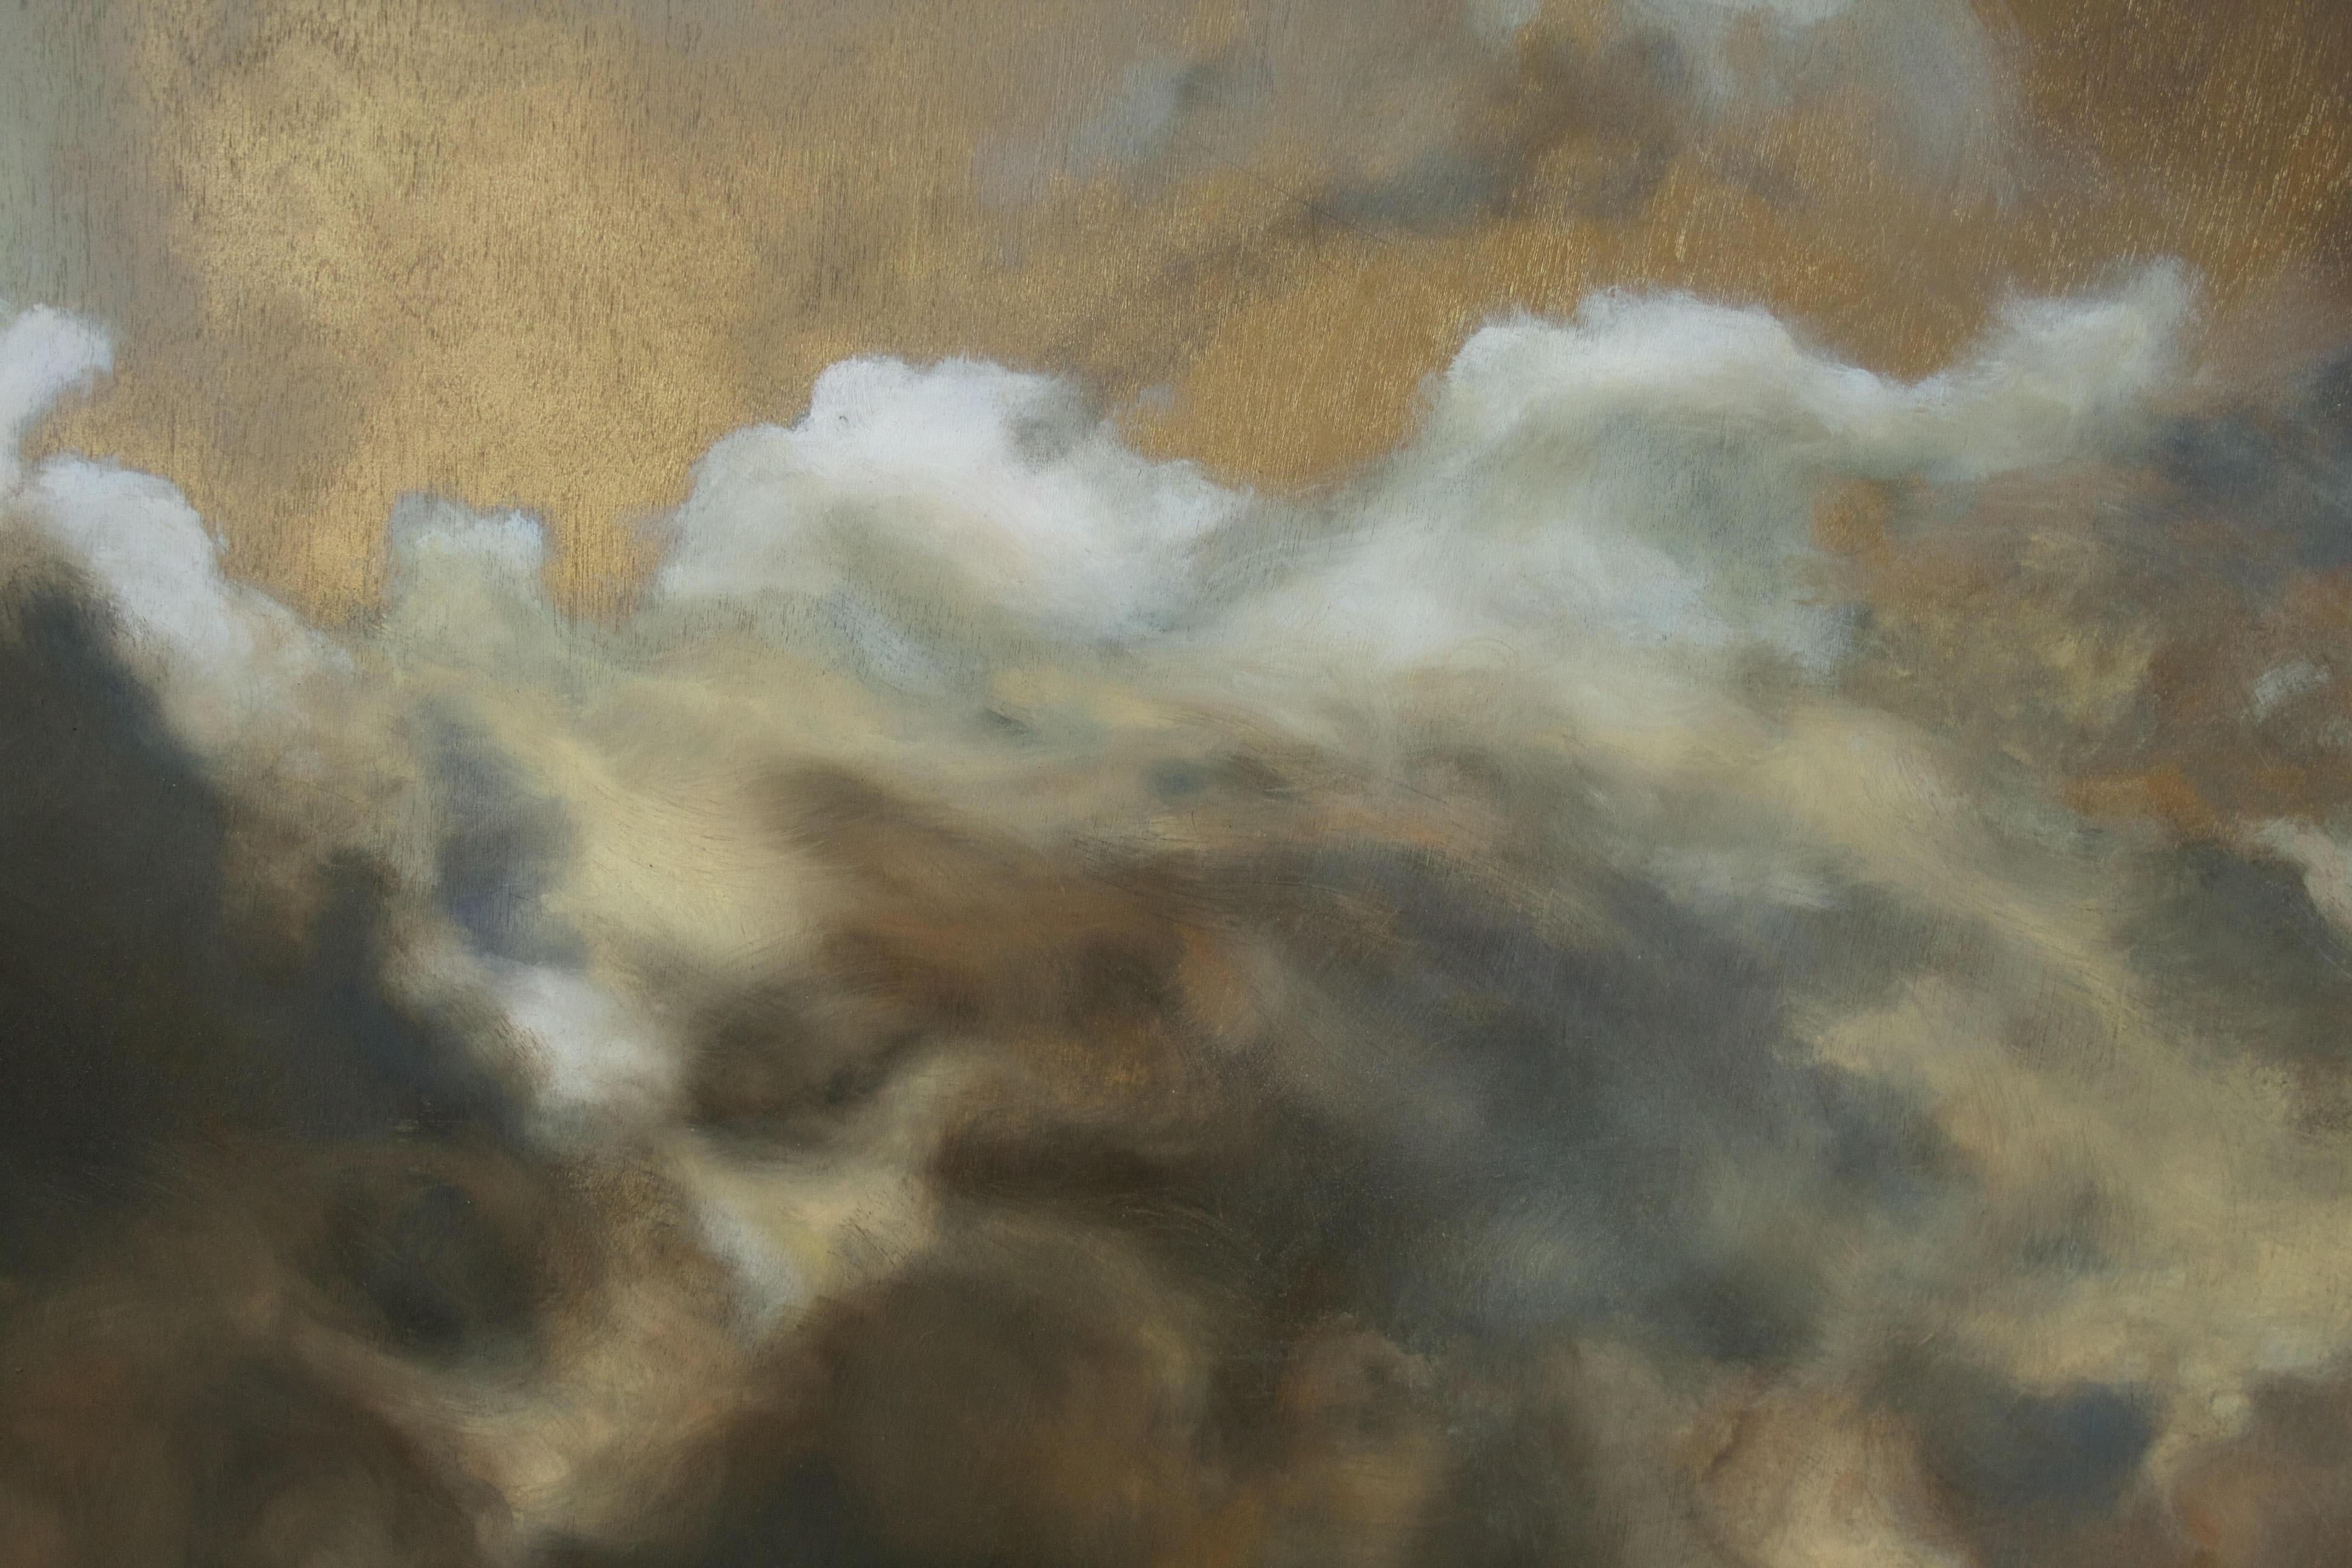 Sky 48 - Painting by James Van Fossan